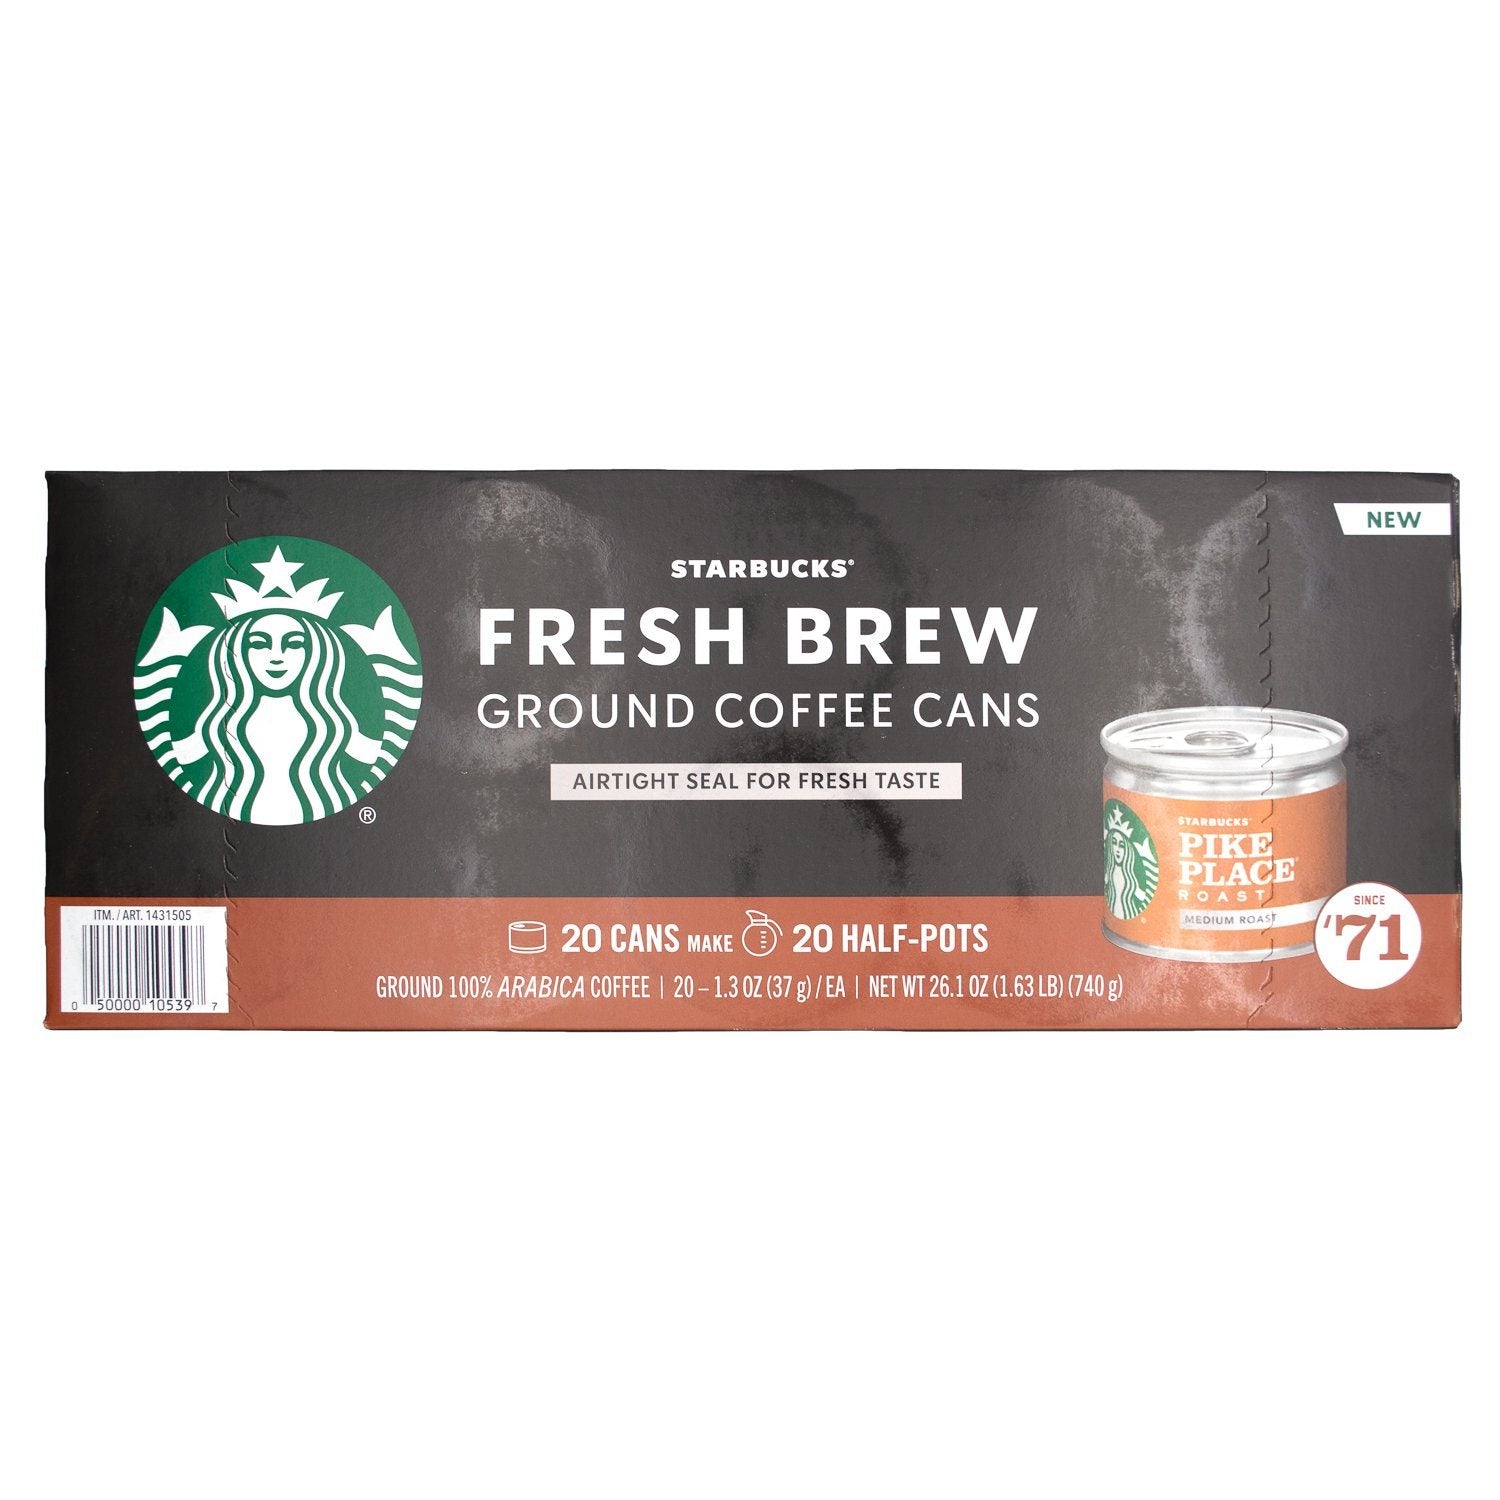 Starbucks Fresh Brew Ground Coffee Cans Starbucks Pike Place 1.3 Ounce-20 Count 